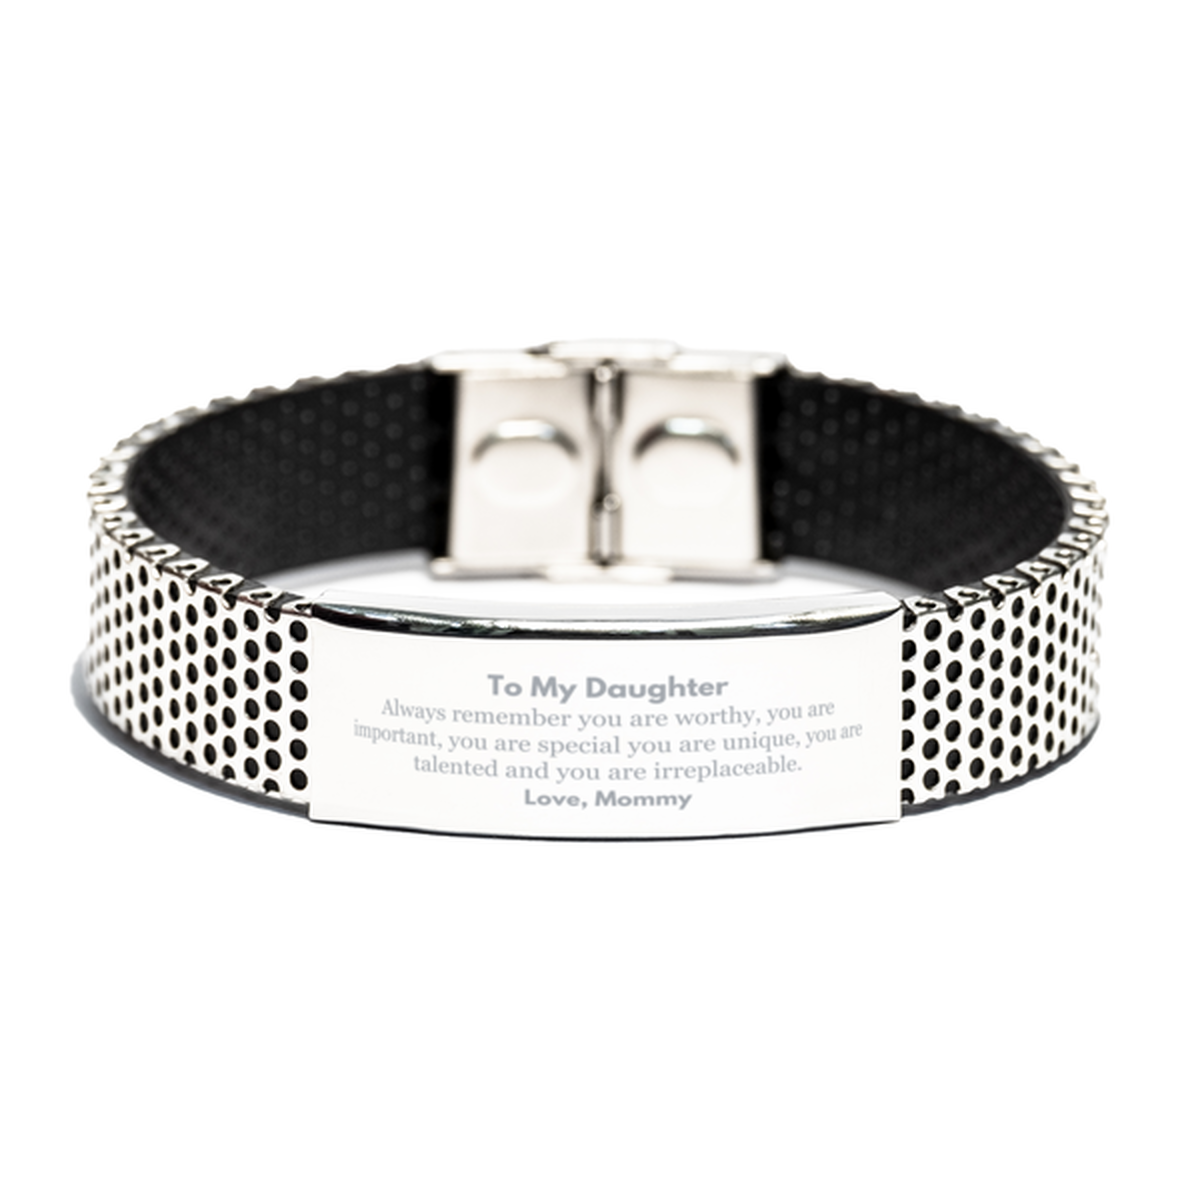 Daughter Birthday Gifts from Mommy, Inspirational Stainless Steel Bracelet for Daughter Christmas Graduation Gifts for Daughter Always remember you are worthy, you are important. Love, Mommy